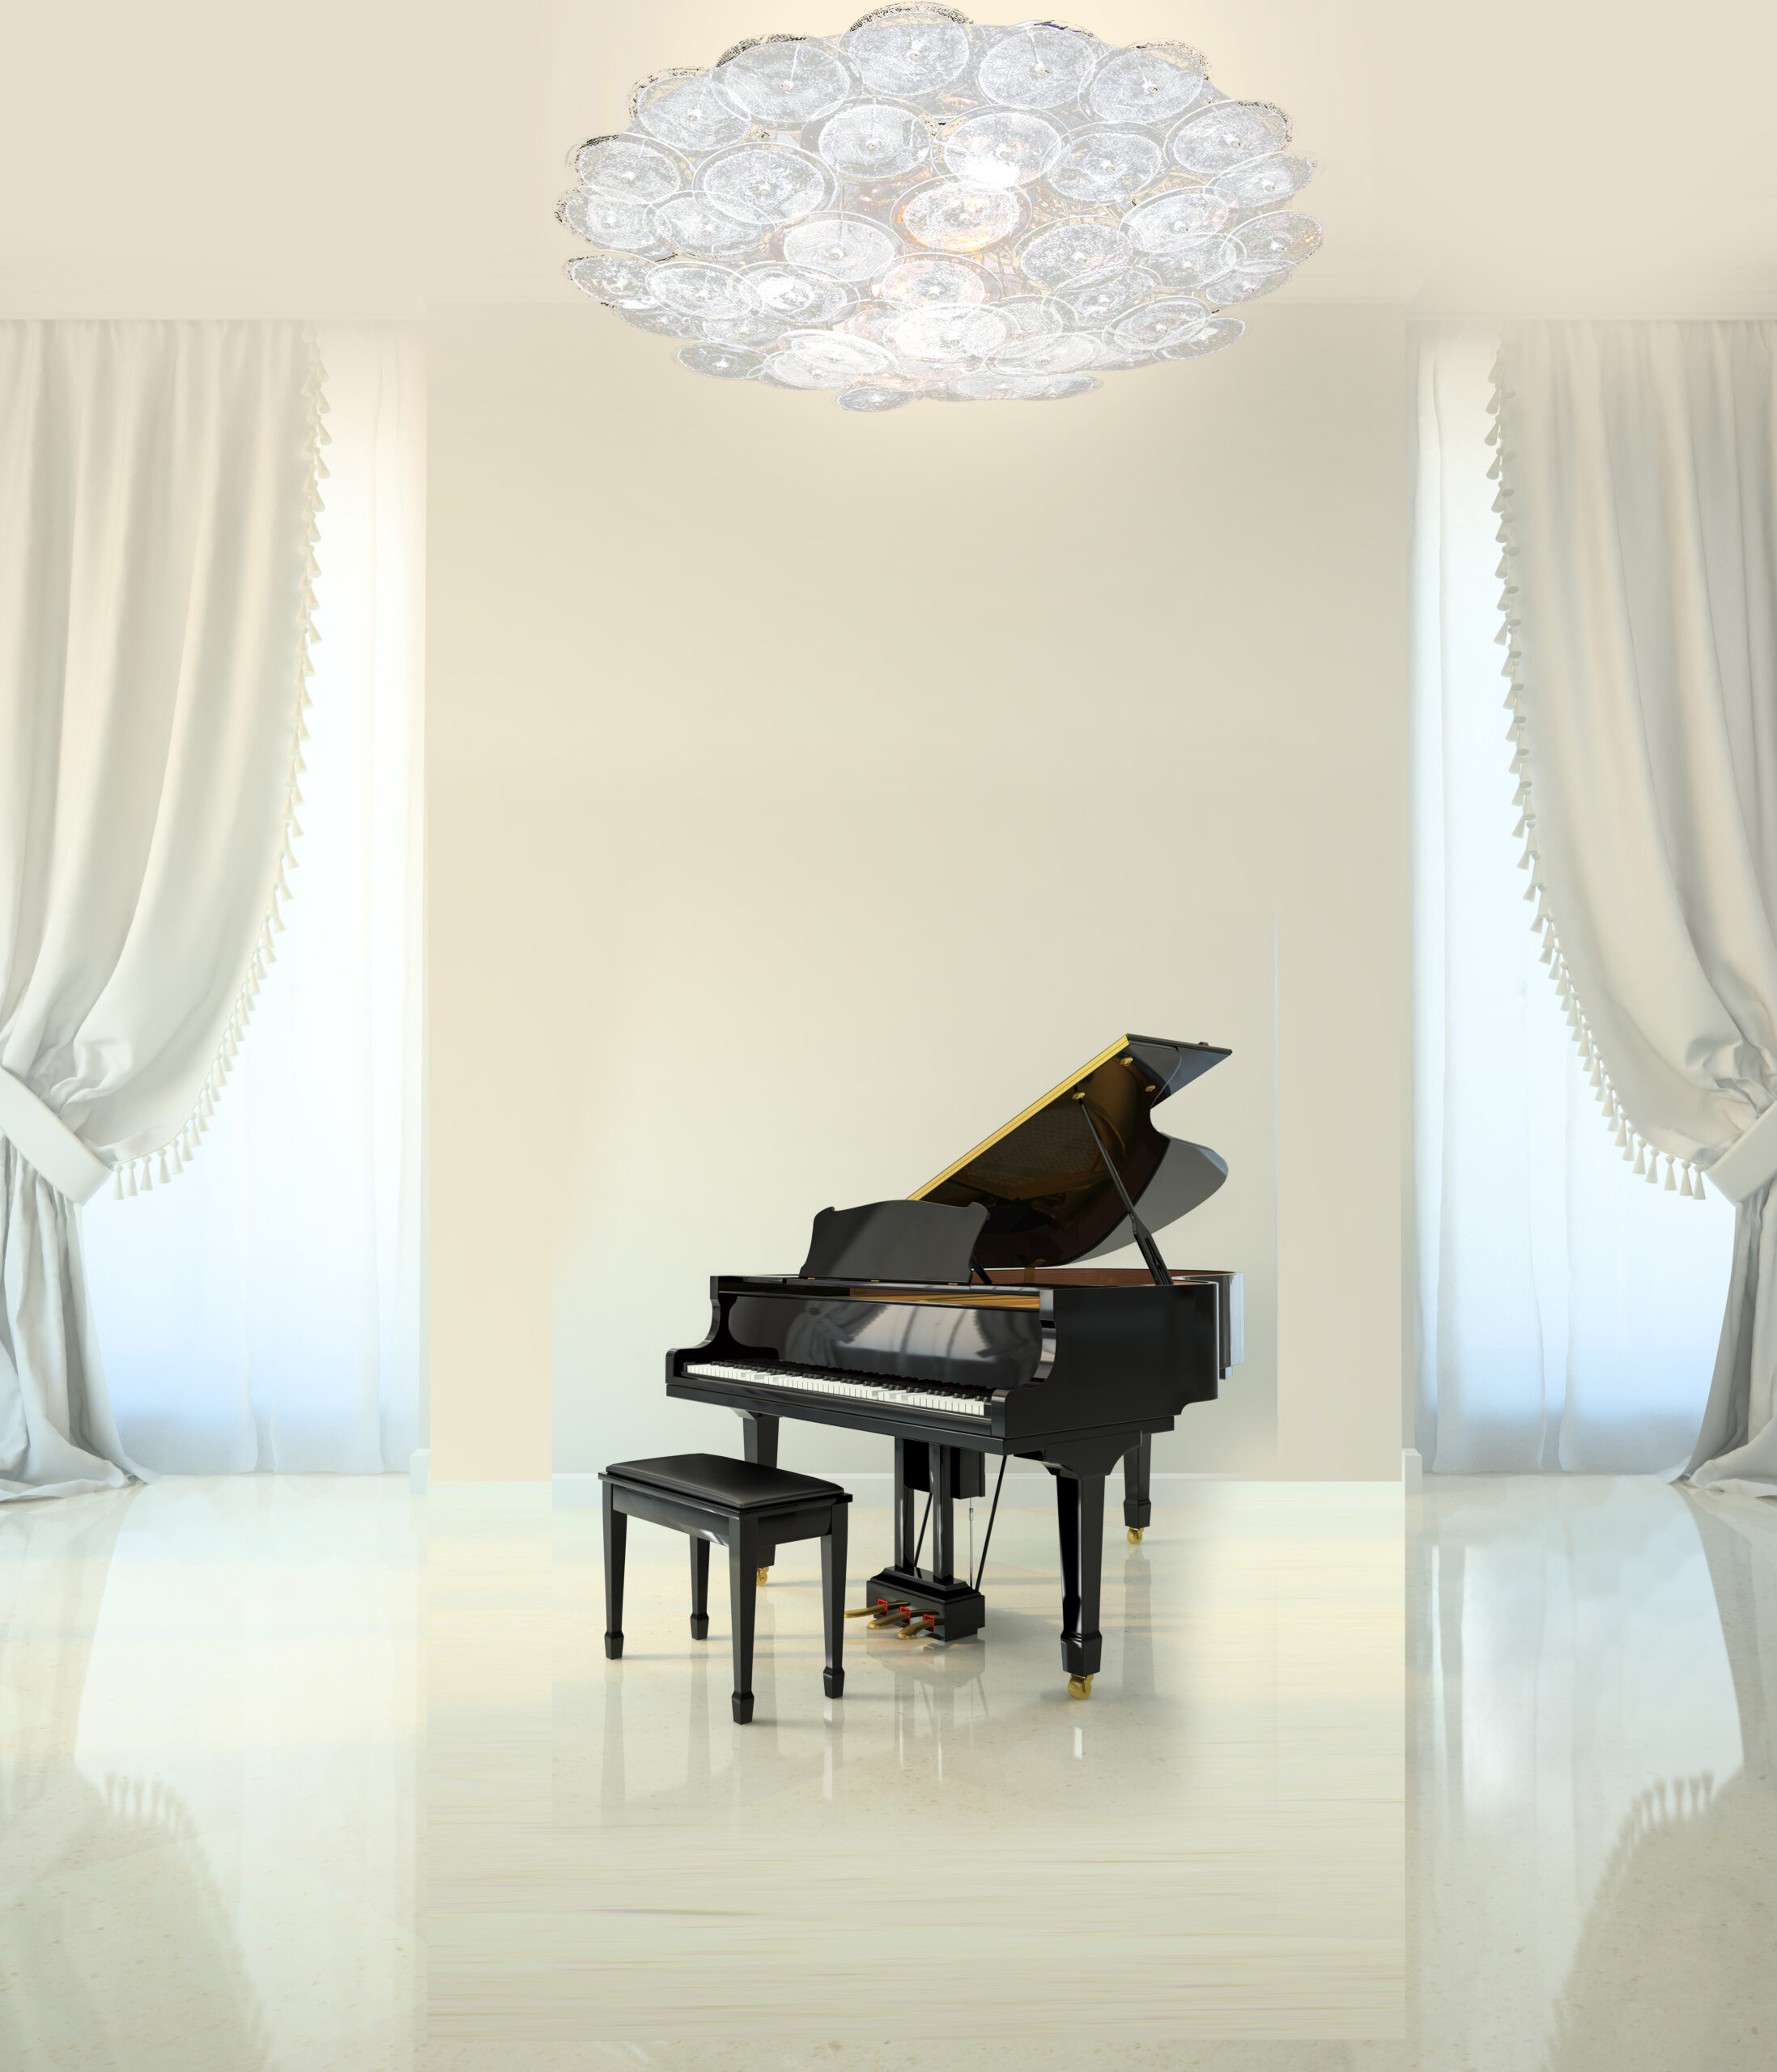 Room in classic style with black piano